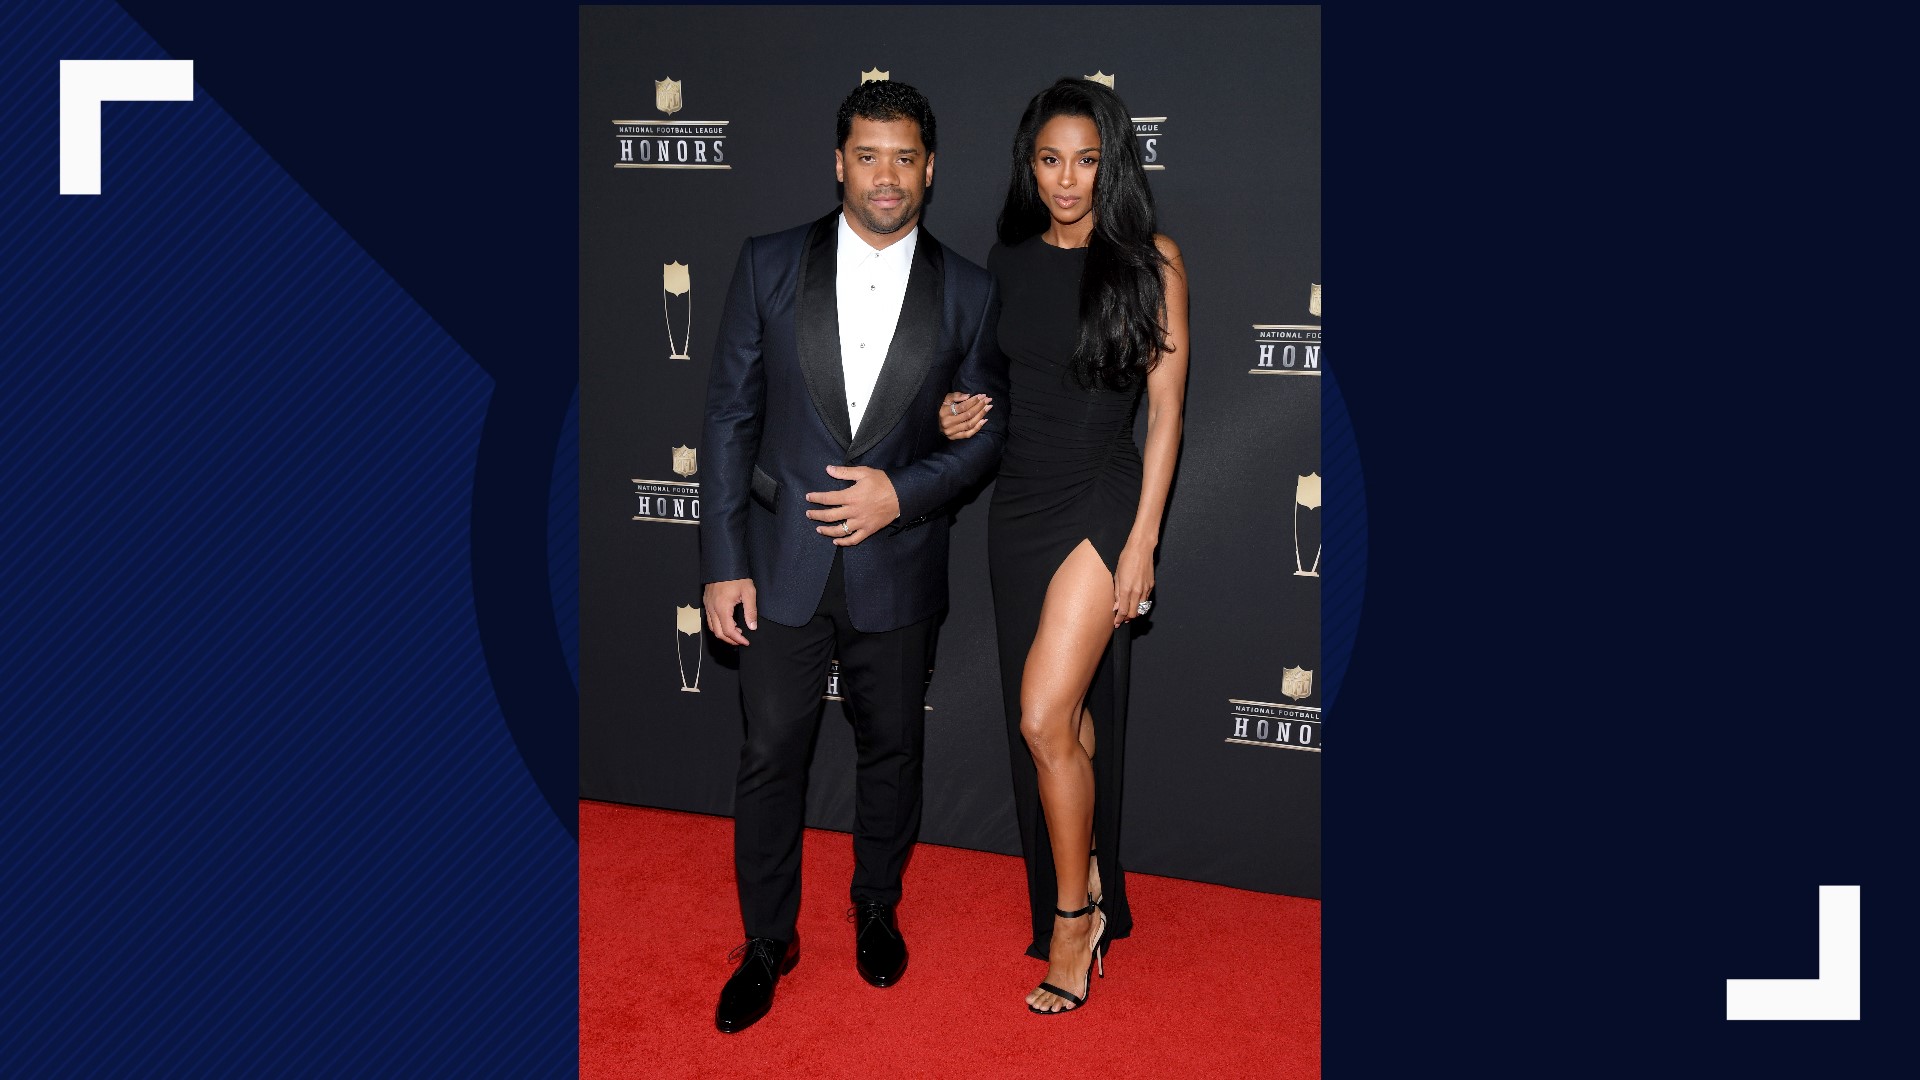 PHOTOS NFL Honors red carpet